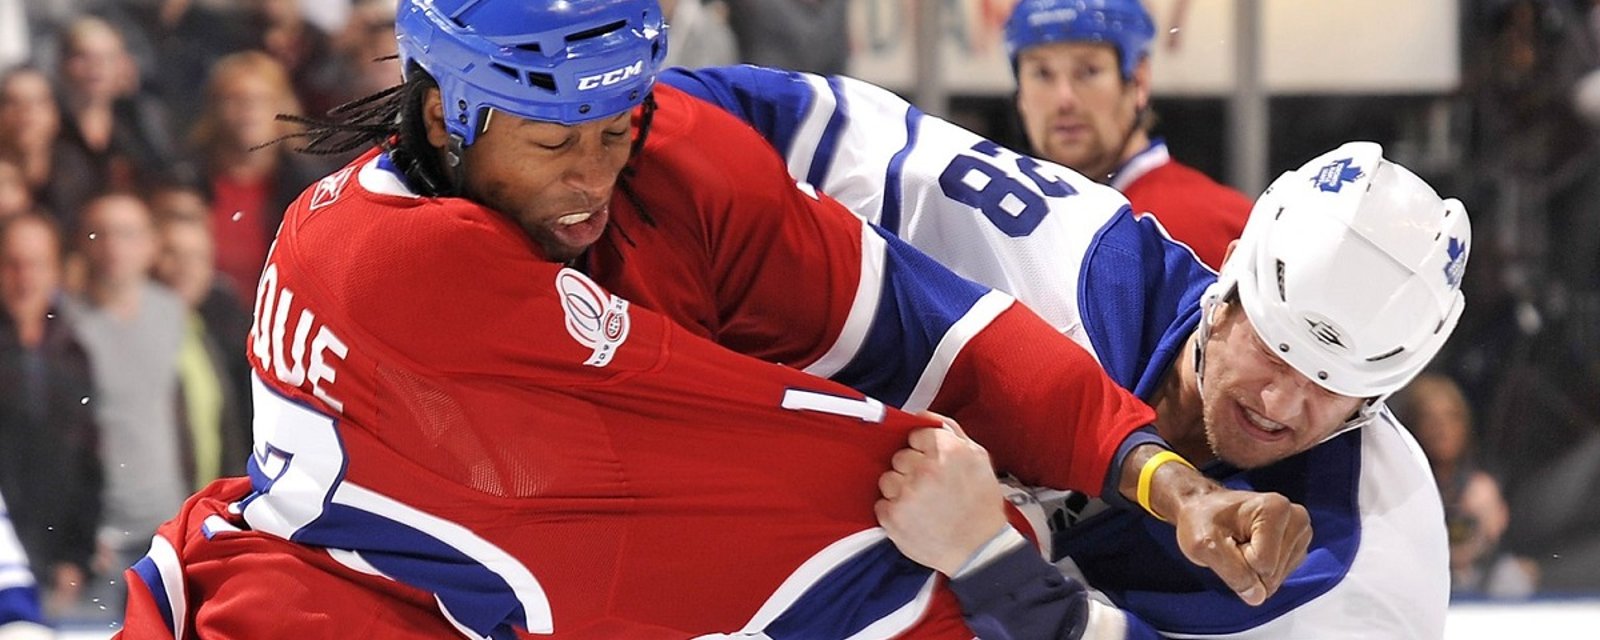 Former NHL enforcer Georges Laraque to step into the ring against Mike Tyson!